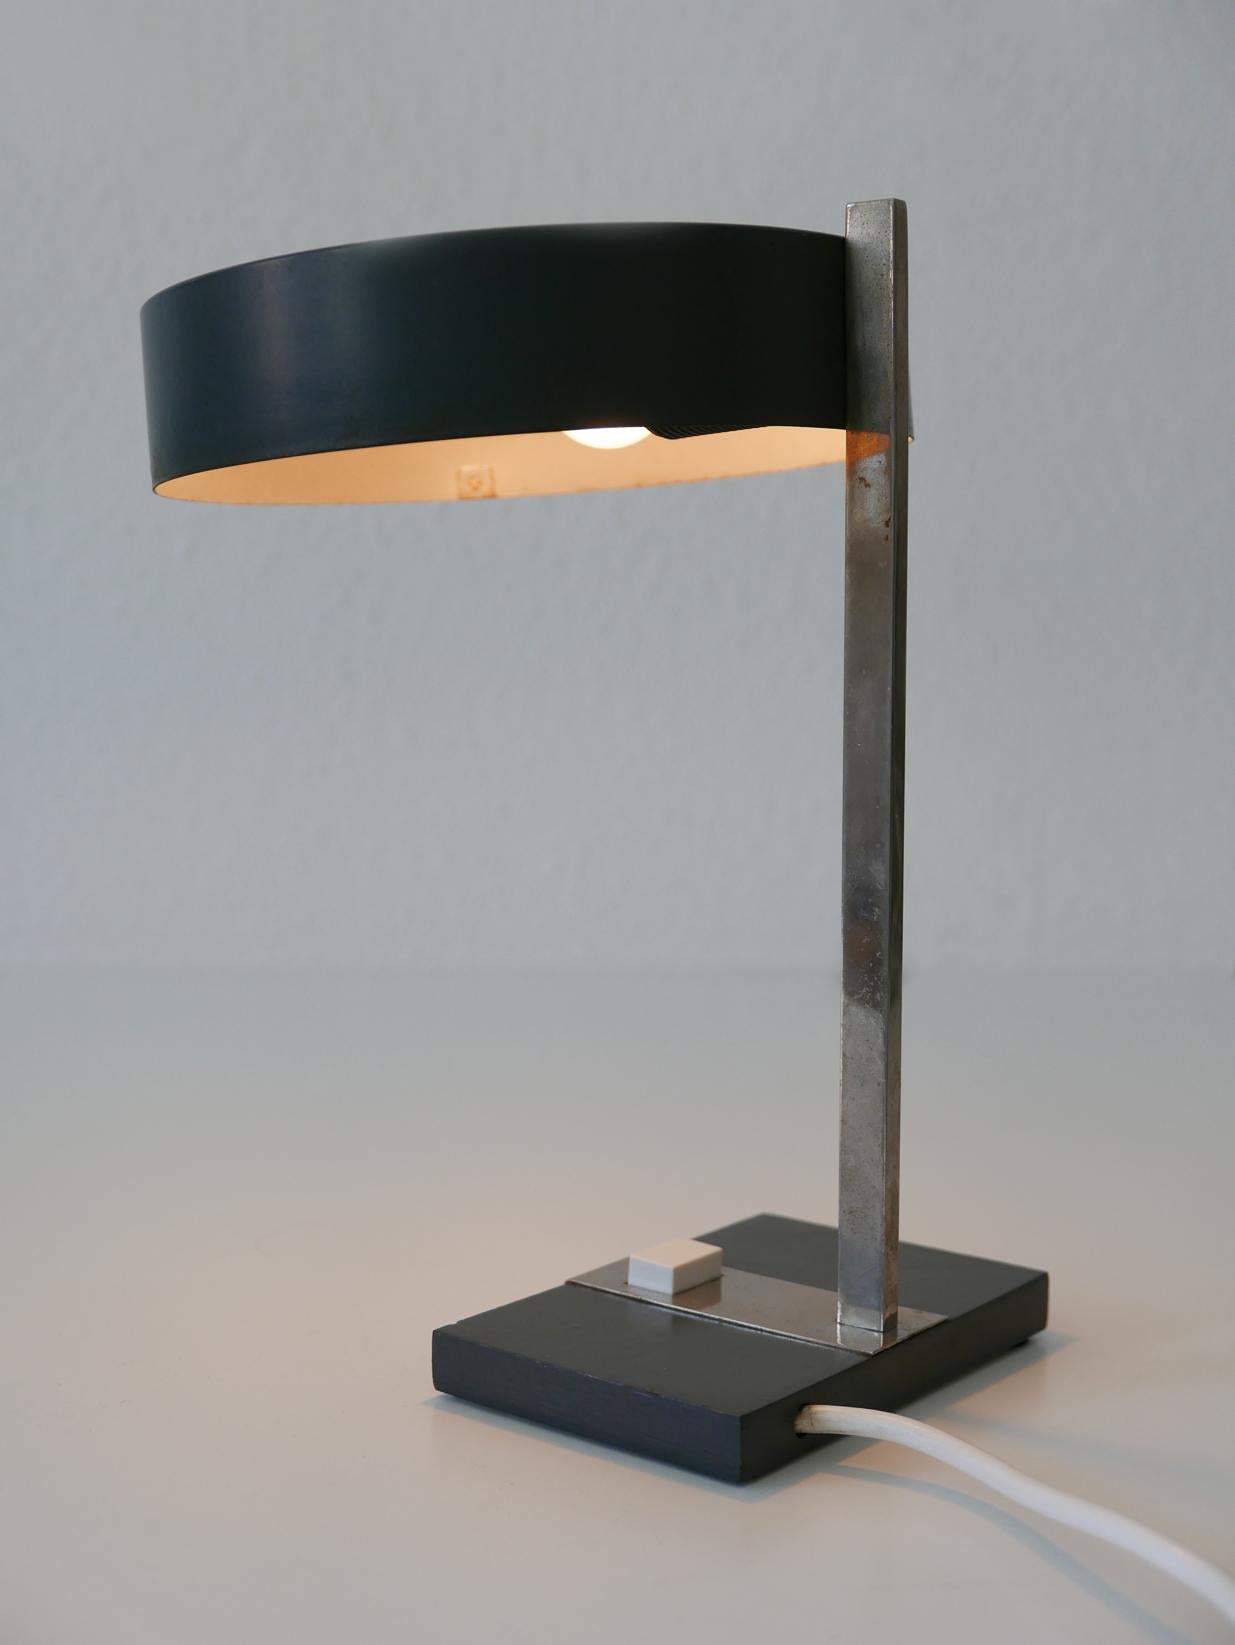 Mid-20th Century Elegant Mid-Century Modern Table Lamp or Desk Light by Hillebrand, 1960s Germany For Sale